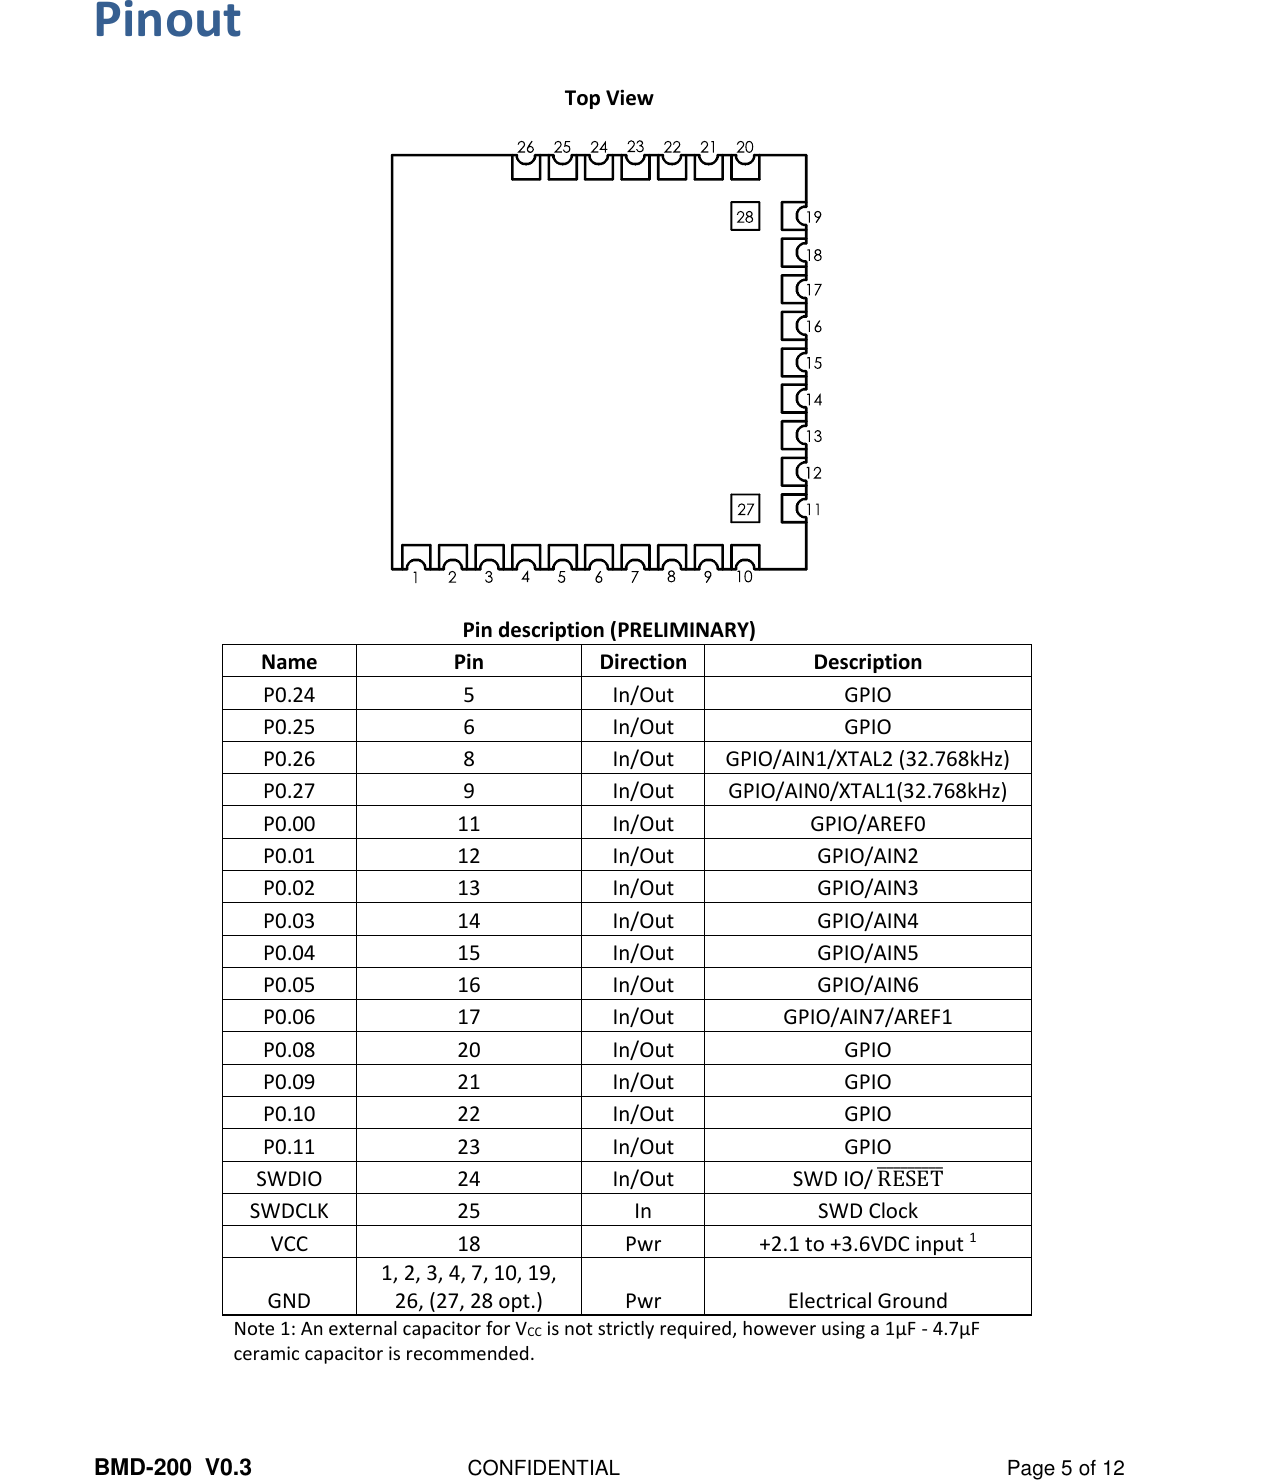  BMD-200  V0.3  CONFIDENTIAL  Page 5 of 12 Pinout Top View    Pin description (PRELIMINARY) Name Pin Direction Description P0.24 5 In/Out GPIO P0.25 6 In/Out GPIO P0.26 8 In/Out GPIO/AIN1/XTAL2 (32.768kHz) P0.27 9 In/Out GPIO/AIN0/XTAL1(32.768kHz) P0.00 11 In/Out GPIO/AREF0 P0.01 12 In/Out GPIO/AIN2 P0.02 13 In/Out GPIO/AIN3 P0.03 14 In/Out GPIO/AIN4 P0.04 15 In/Out GPIO/AIN5 P0.05 16 In/Out GPIO/AIN6 P0.06 17 In/Out GPIO/AIN7/AREF1 P0.08 20 In/Out GPIO P0.09 21 In/Out GPIO P0.10 22 In/Out GPIO P0.11 23 In/Out GPIO SWDIO 24 In/Out SWD IO/ RESET̅̅̅̅̅̅̅̅̅ SWDCLK 25 In SWD Clock VCC 18 Pwr +2.1 to +3.6VDC input 1 GND 1, 2, 3, 4, 7, 10, 19, 26, (27, 28 opt.) Pwr Electrical Ground Note 1: An external capacitor for VCC is not strictly required, however using a 1µF - 4.7µF ceramic capacitor is recommended.     